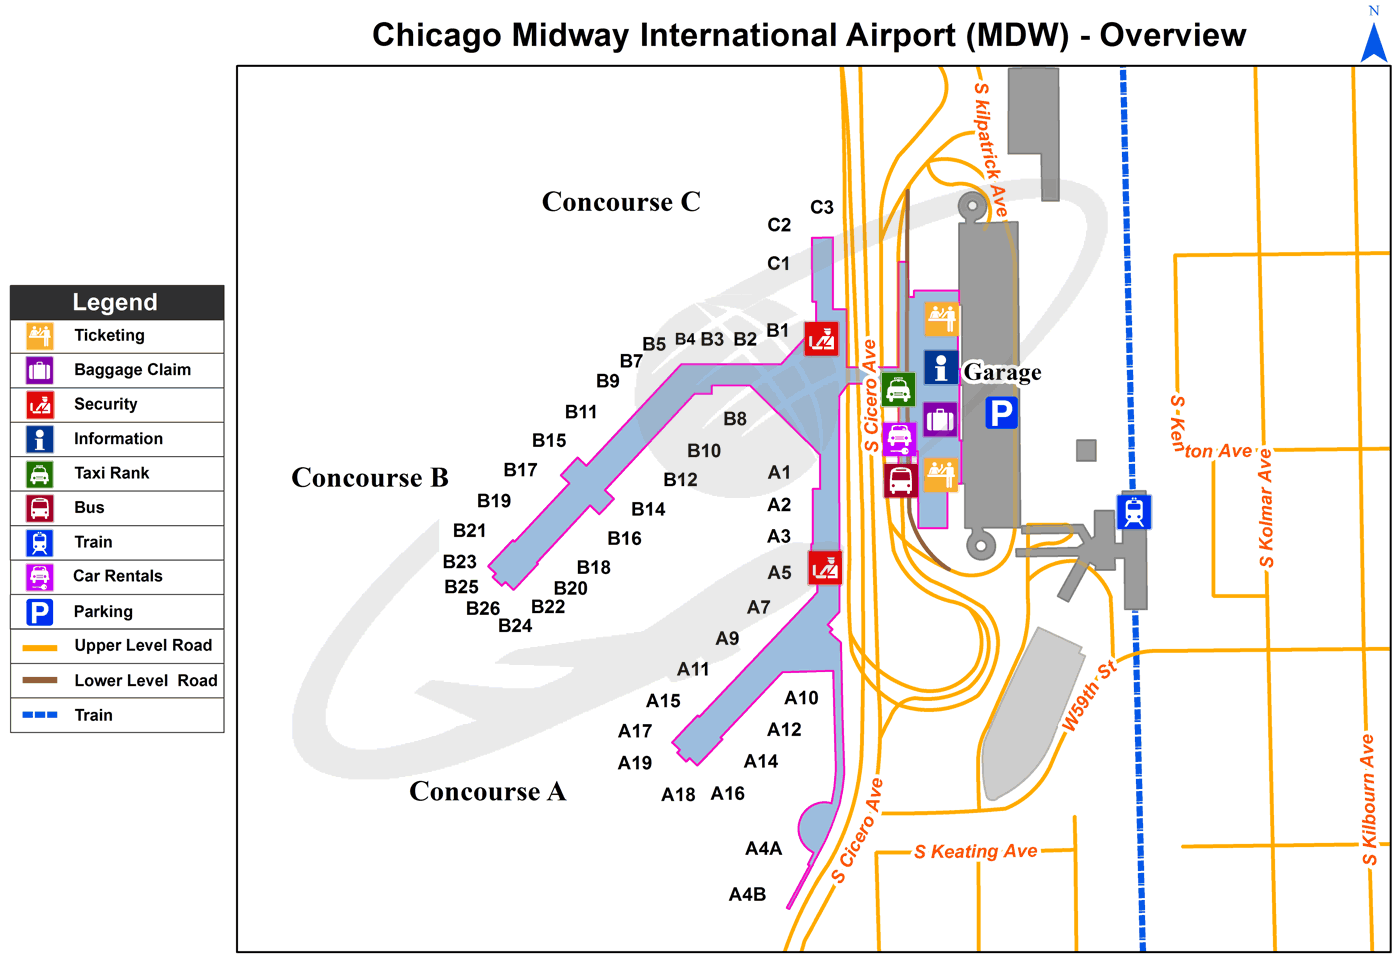 MDW_overview_map